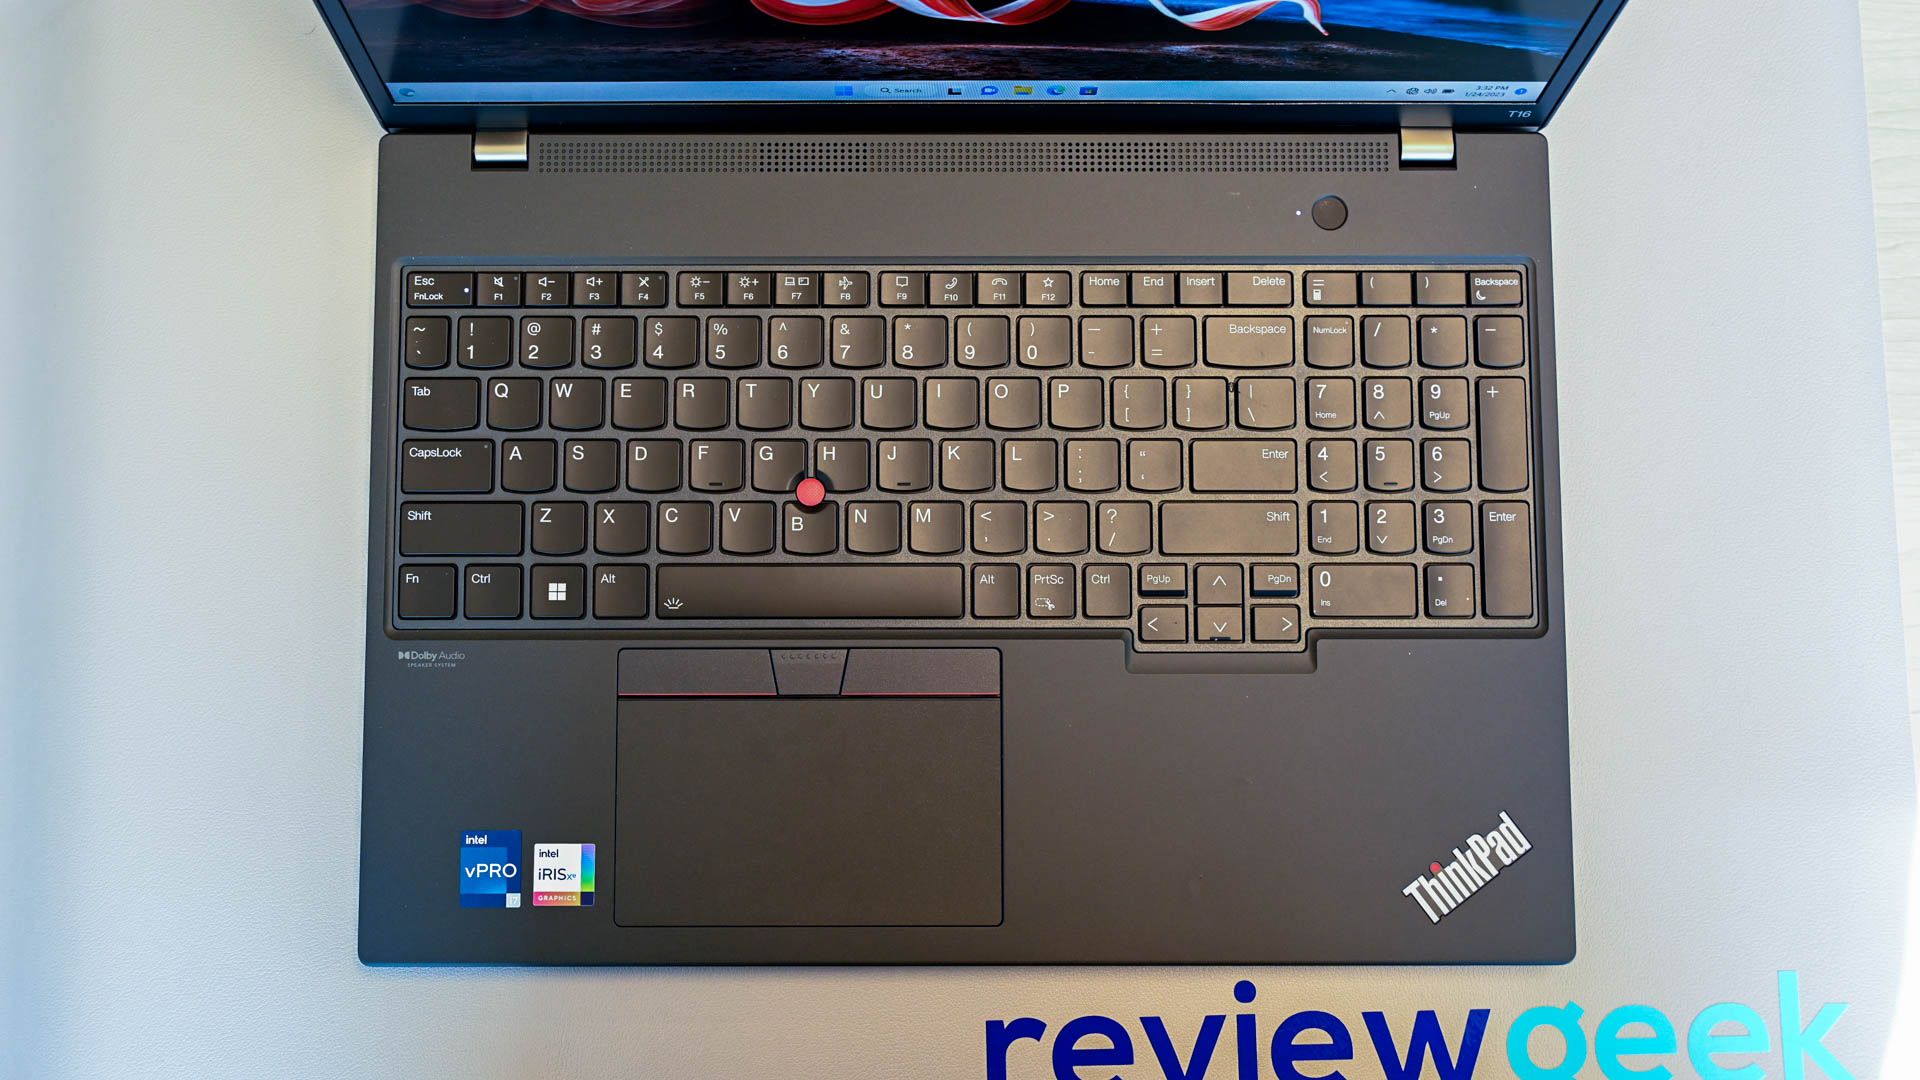 Top down view of the Lenovo ThinkPad T16 Gen 1 keyboard.